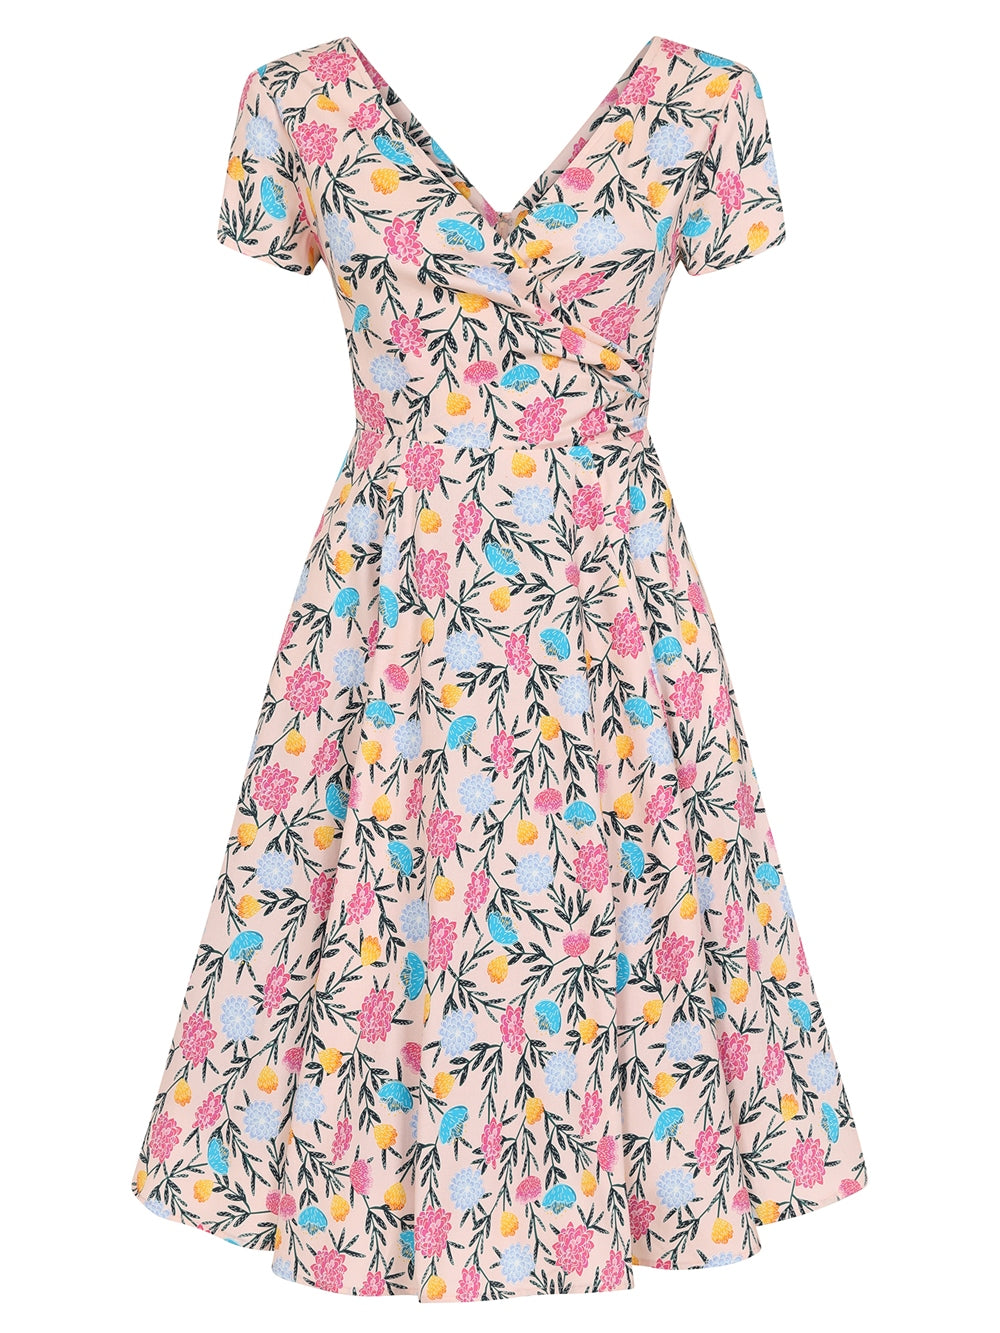 Maria Floral Whimsy Swing Dress